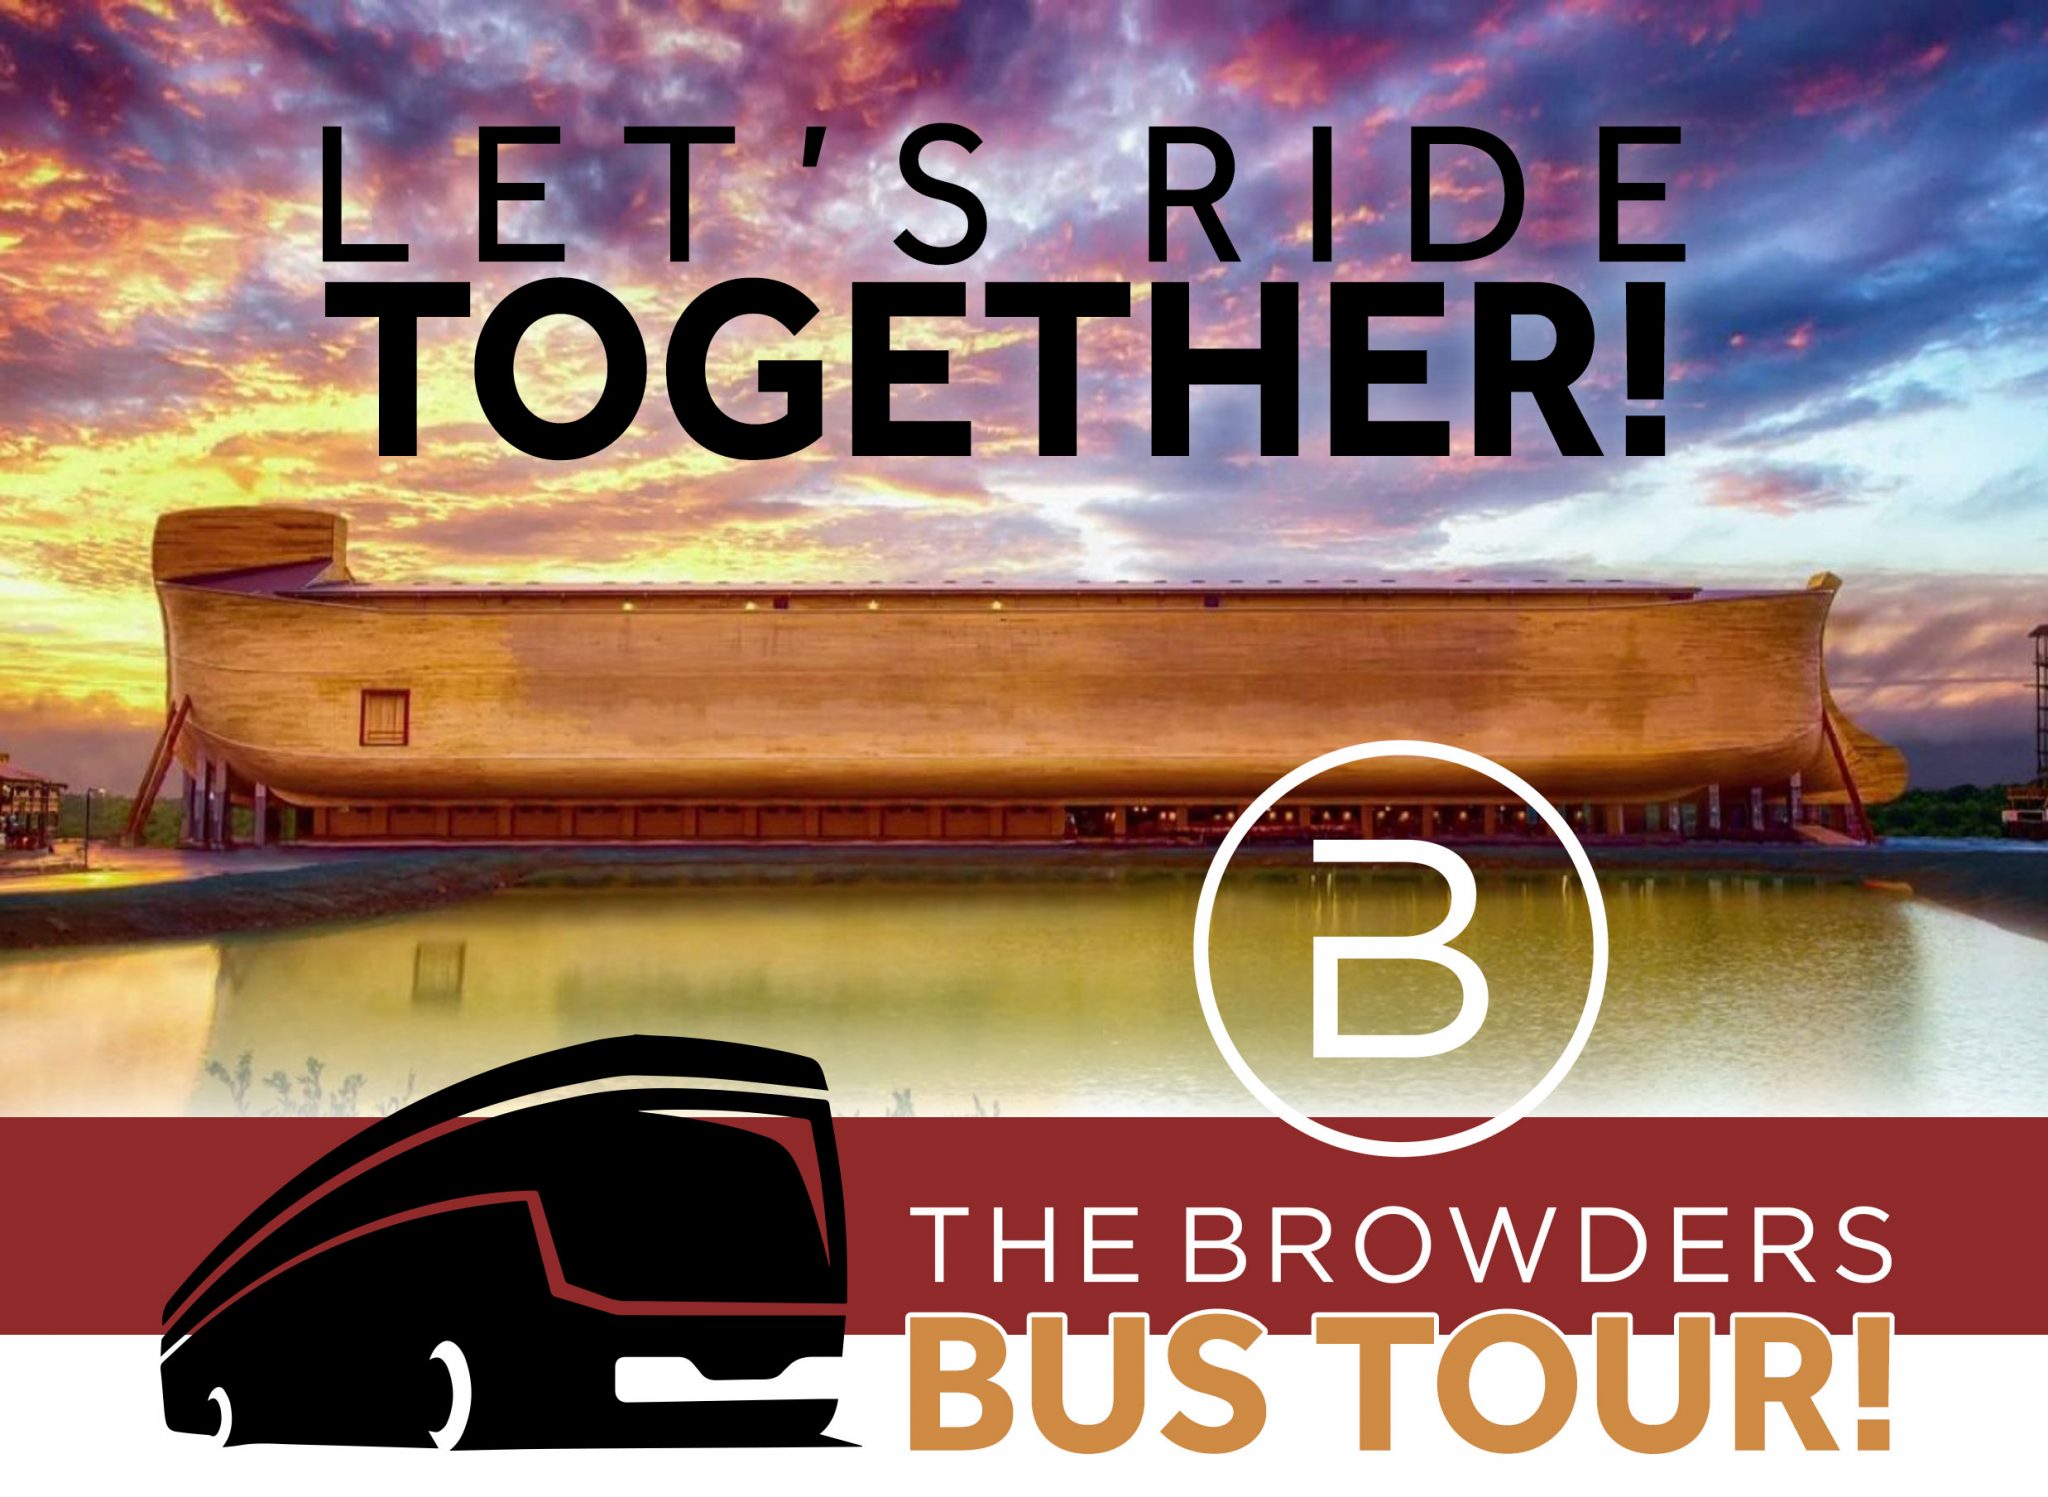 Ark Encounter Bus Tour The Browders